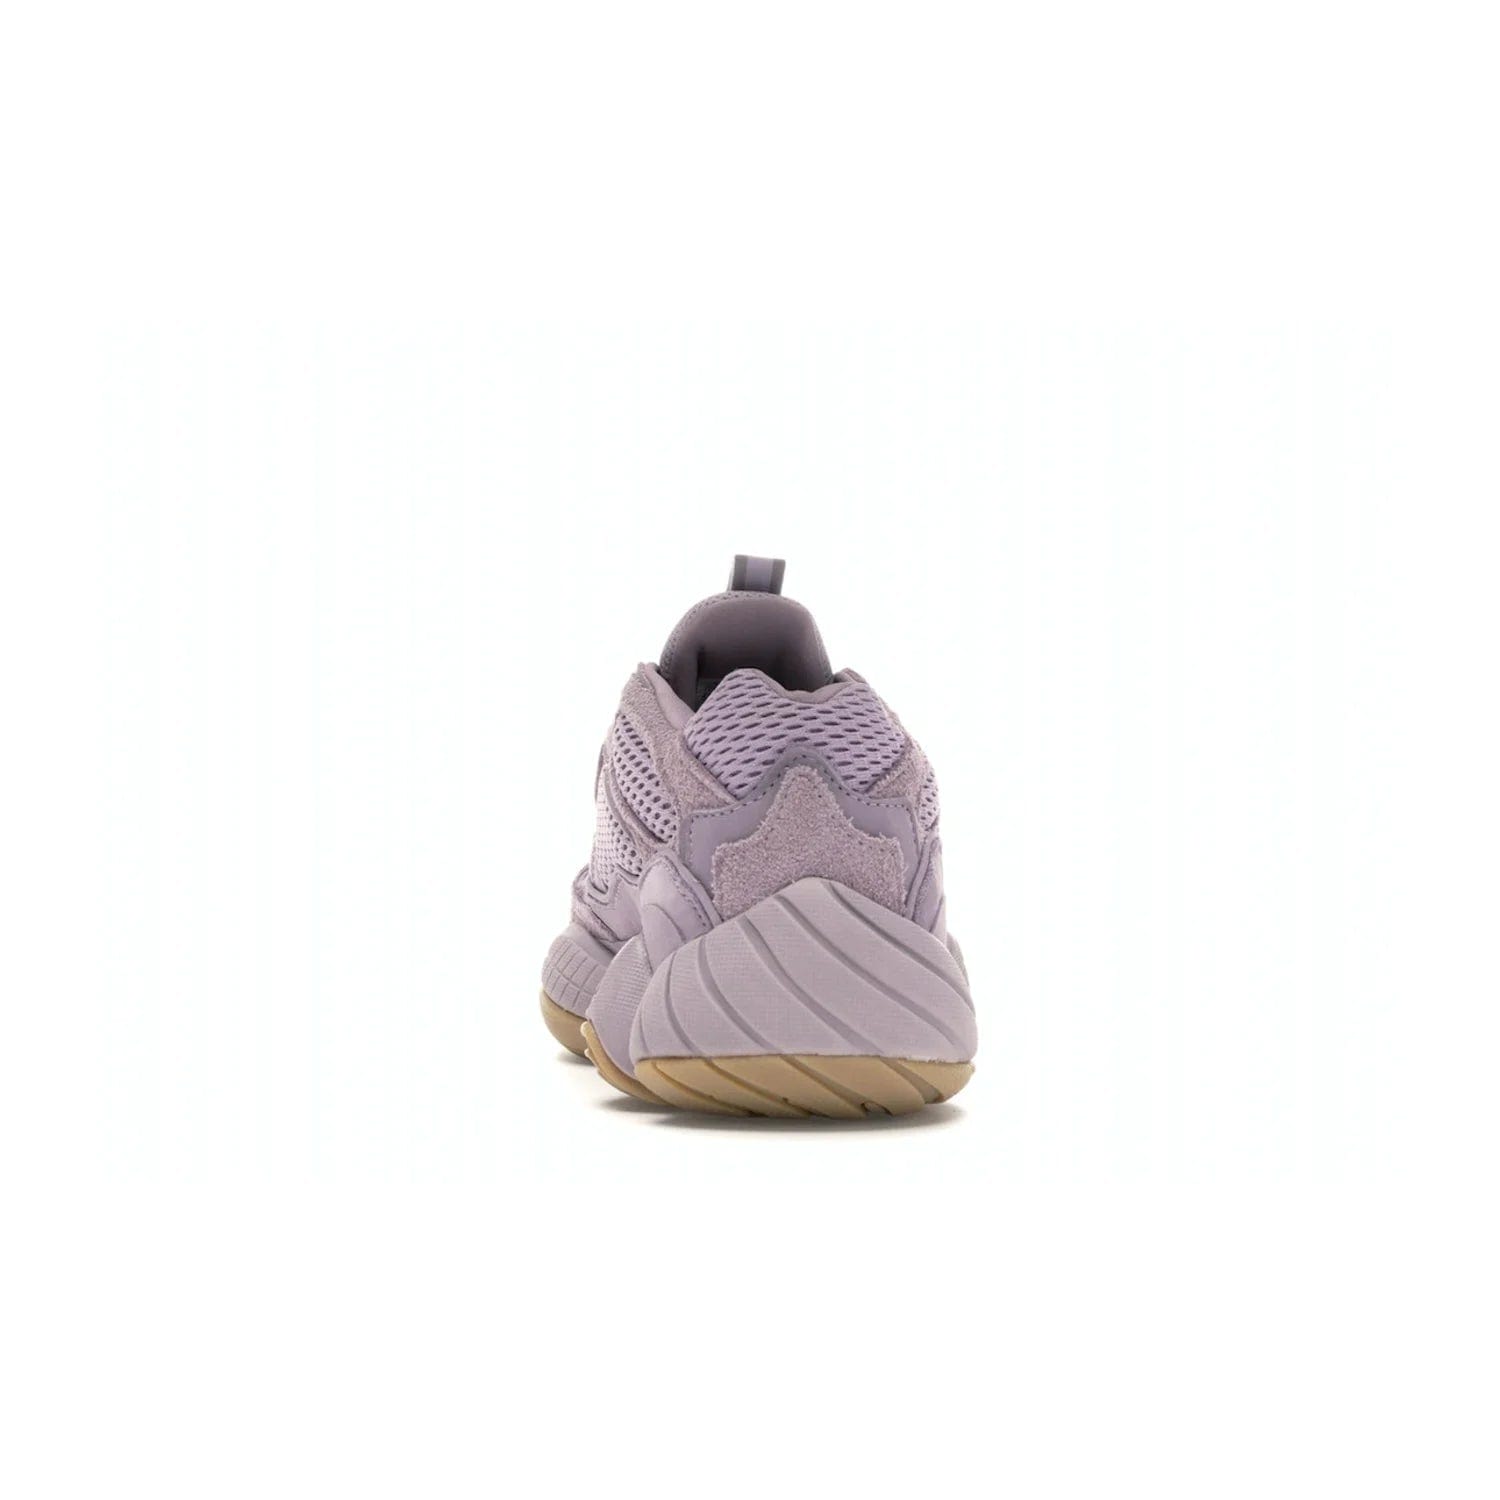 adidas Yeezy 500 Soft Vision - Image 27 - Only at www.BallersClubKickz.com - New adidas Yeezy 500 Soft Vision sneaker featuring a combination of mesh, leather, and suede in a classic Soft Vision colorway. Gum rubber outsole ensures durability and traction. An everyday sneaker that stands out from the crowd.